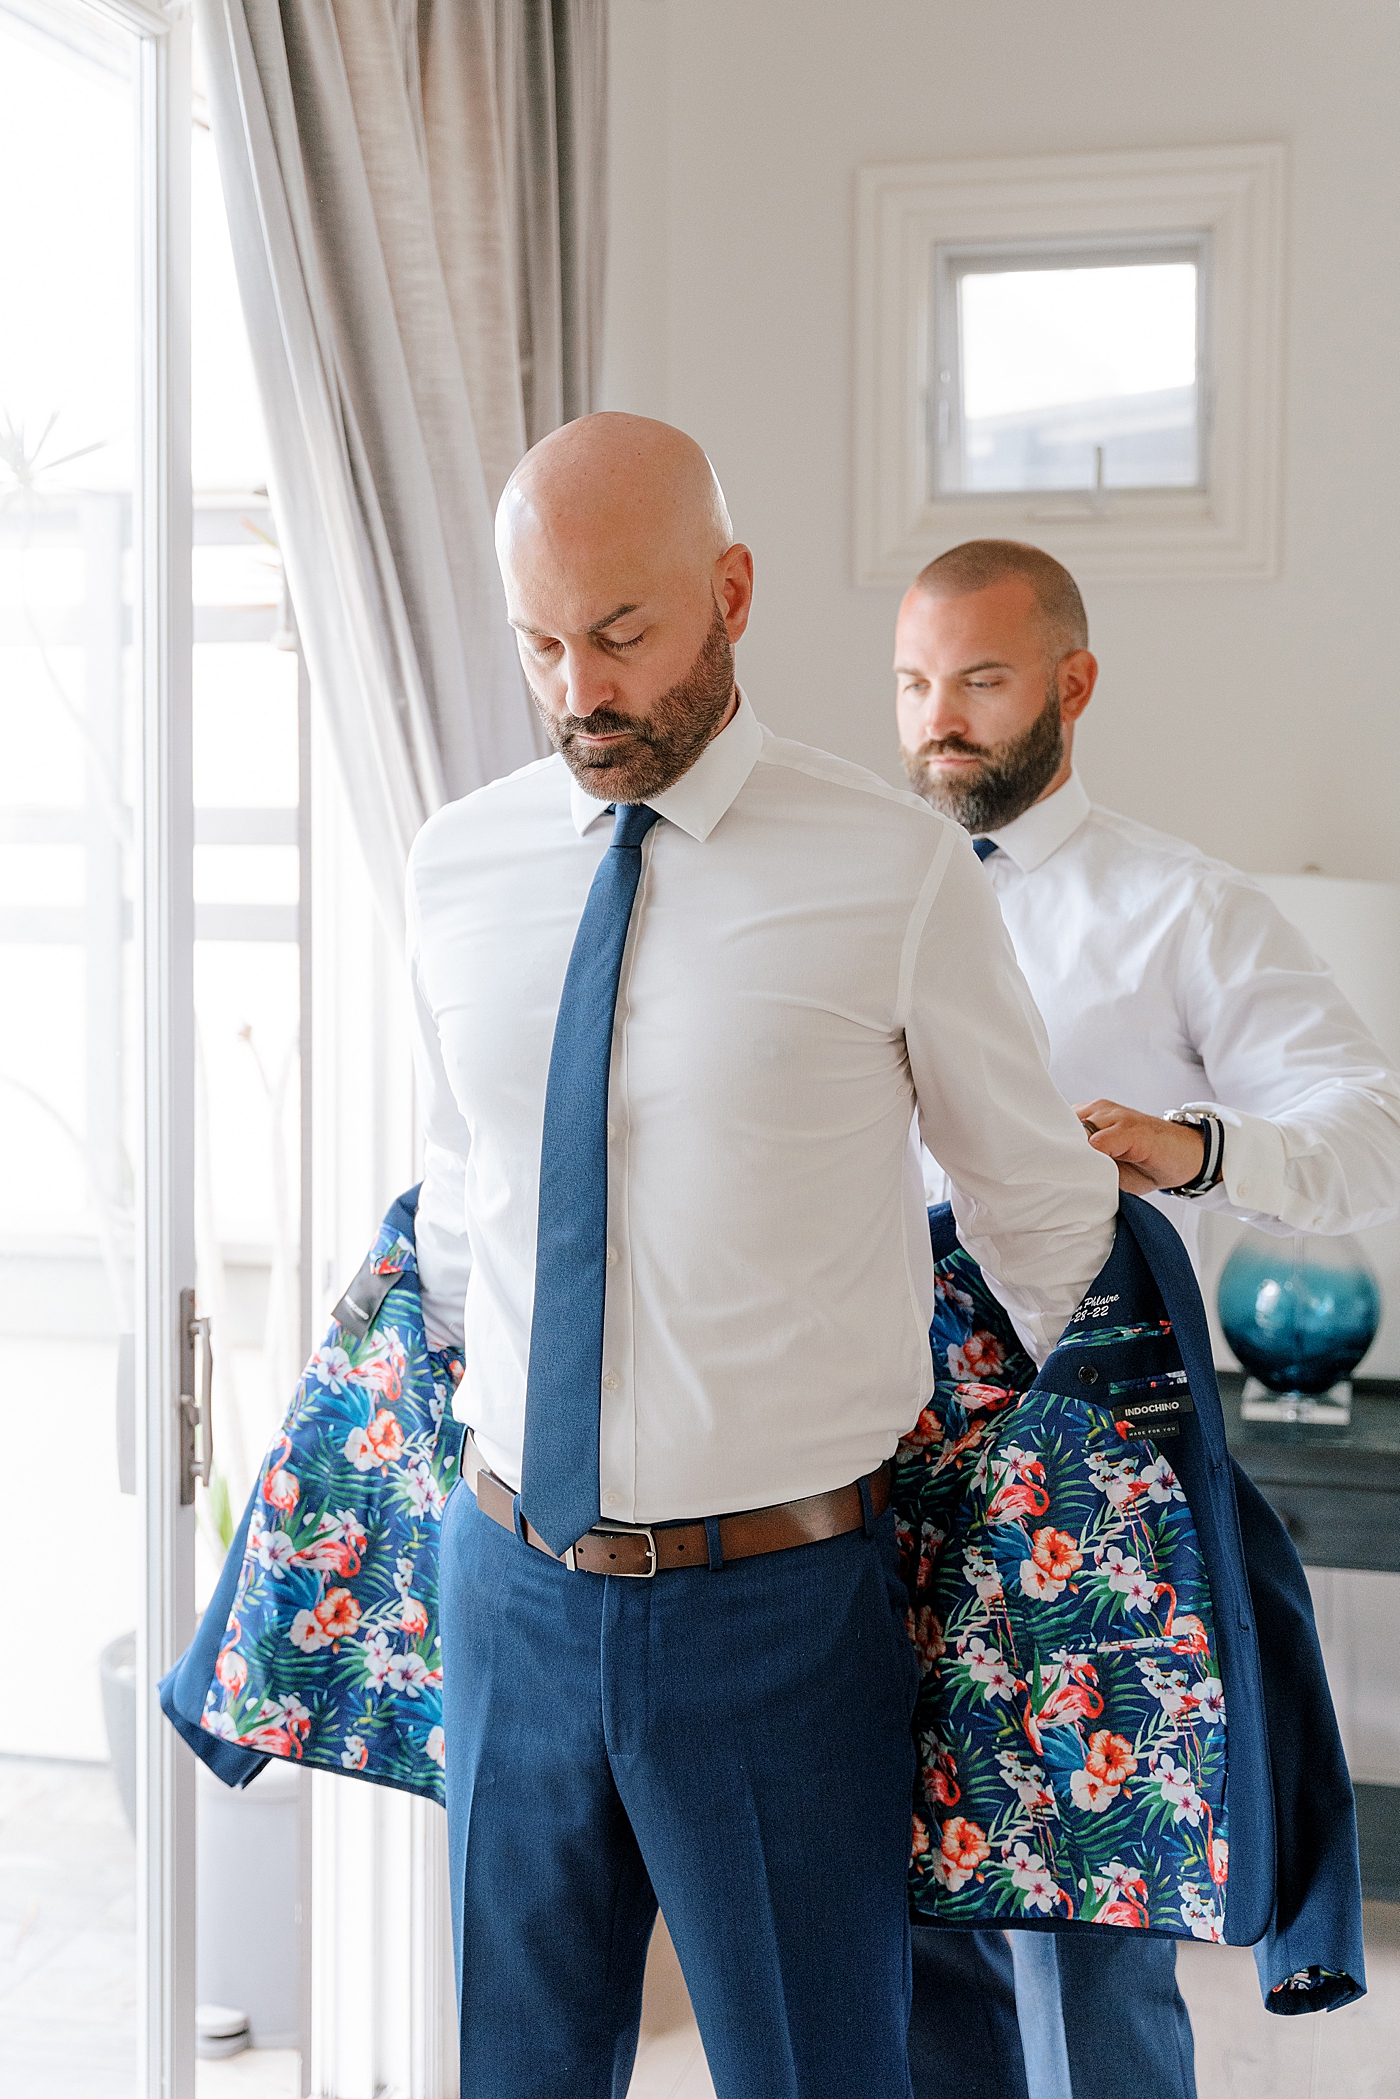 Groomsmen getting ready by helping each other put on navy jackets with bright, floral lining | Image by Hope Helmuth Photography